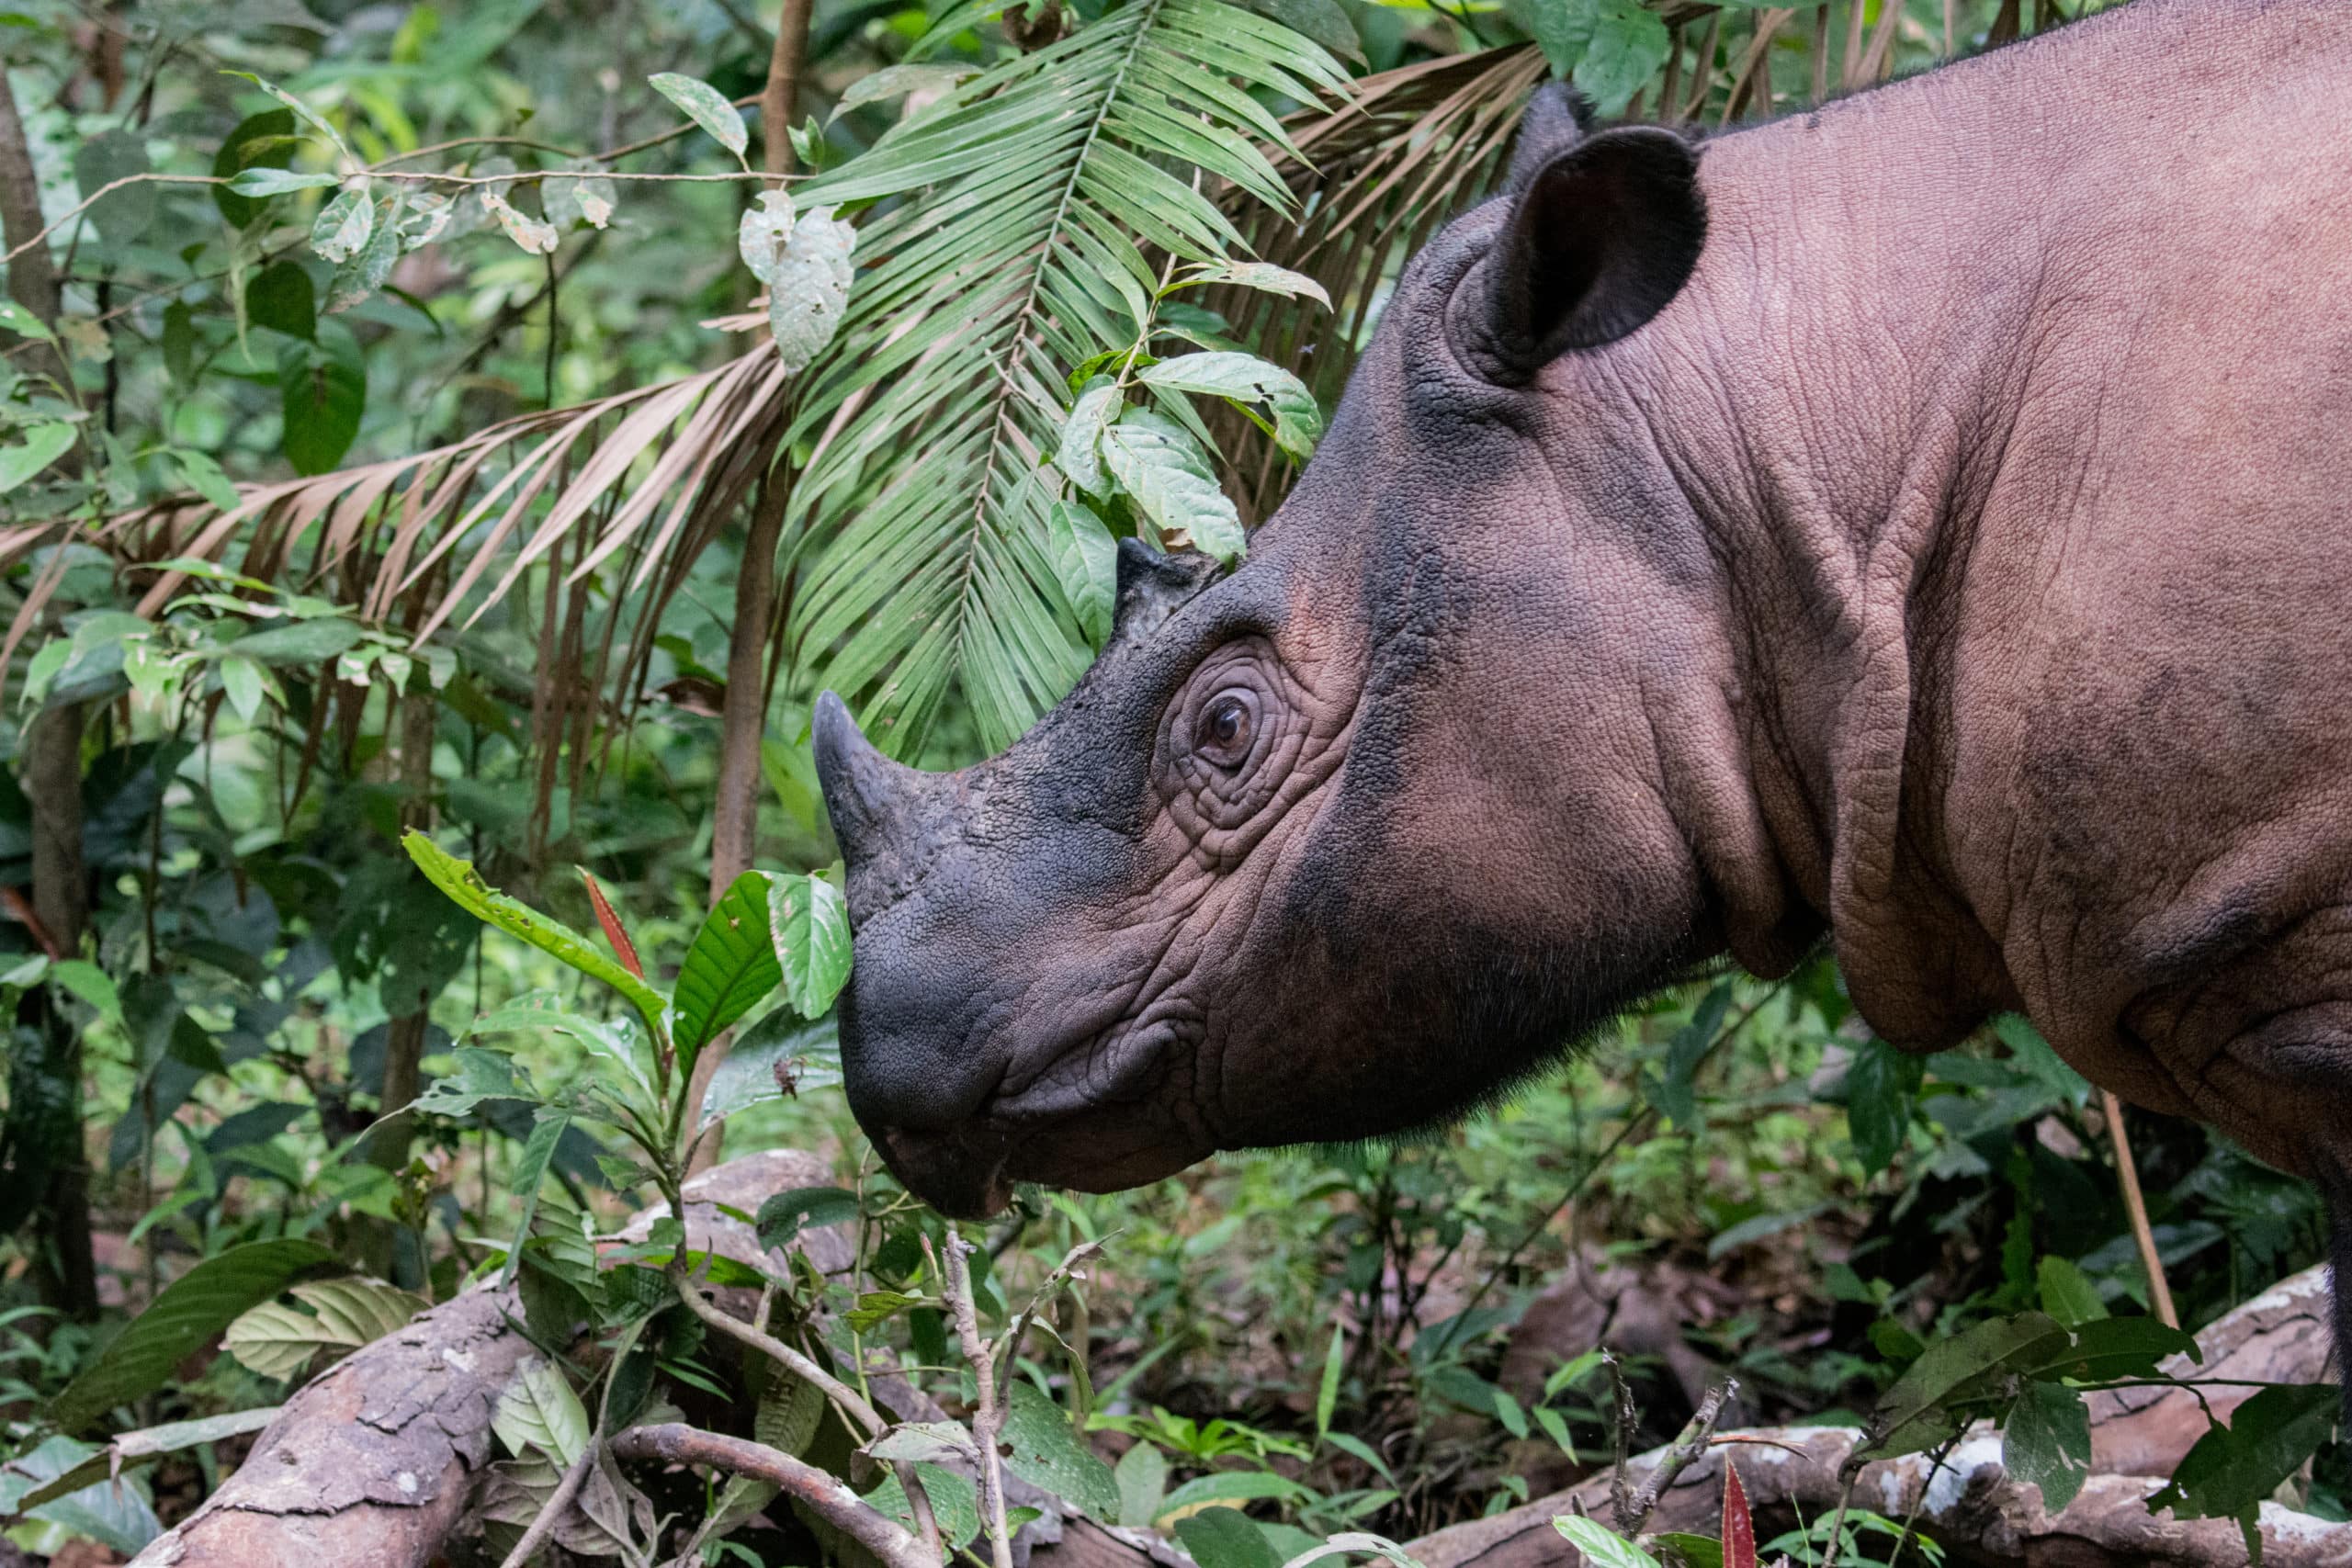 Sumatran Rhino. The new method will help tell a more complete story about the efforts to conserve and save species.